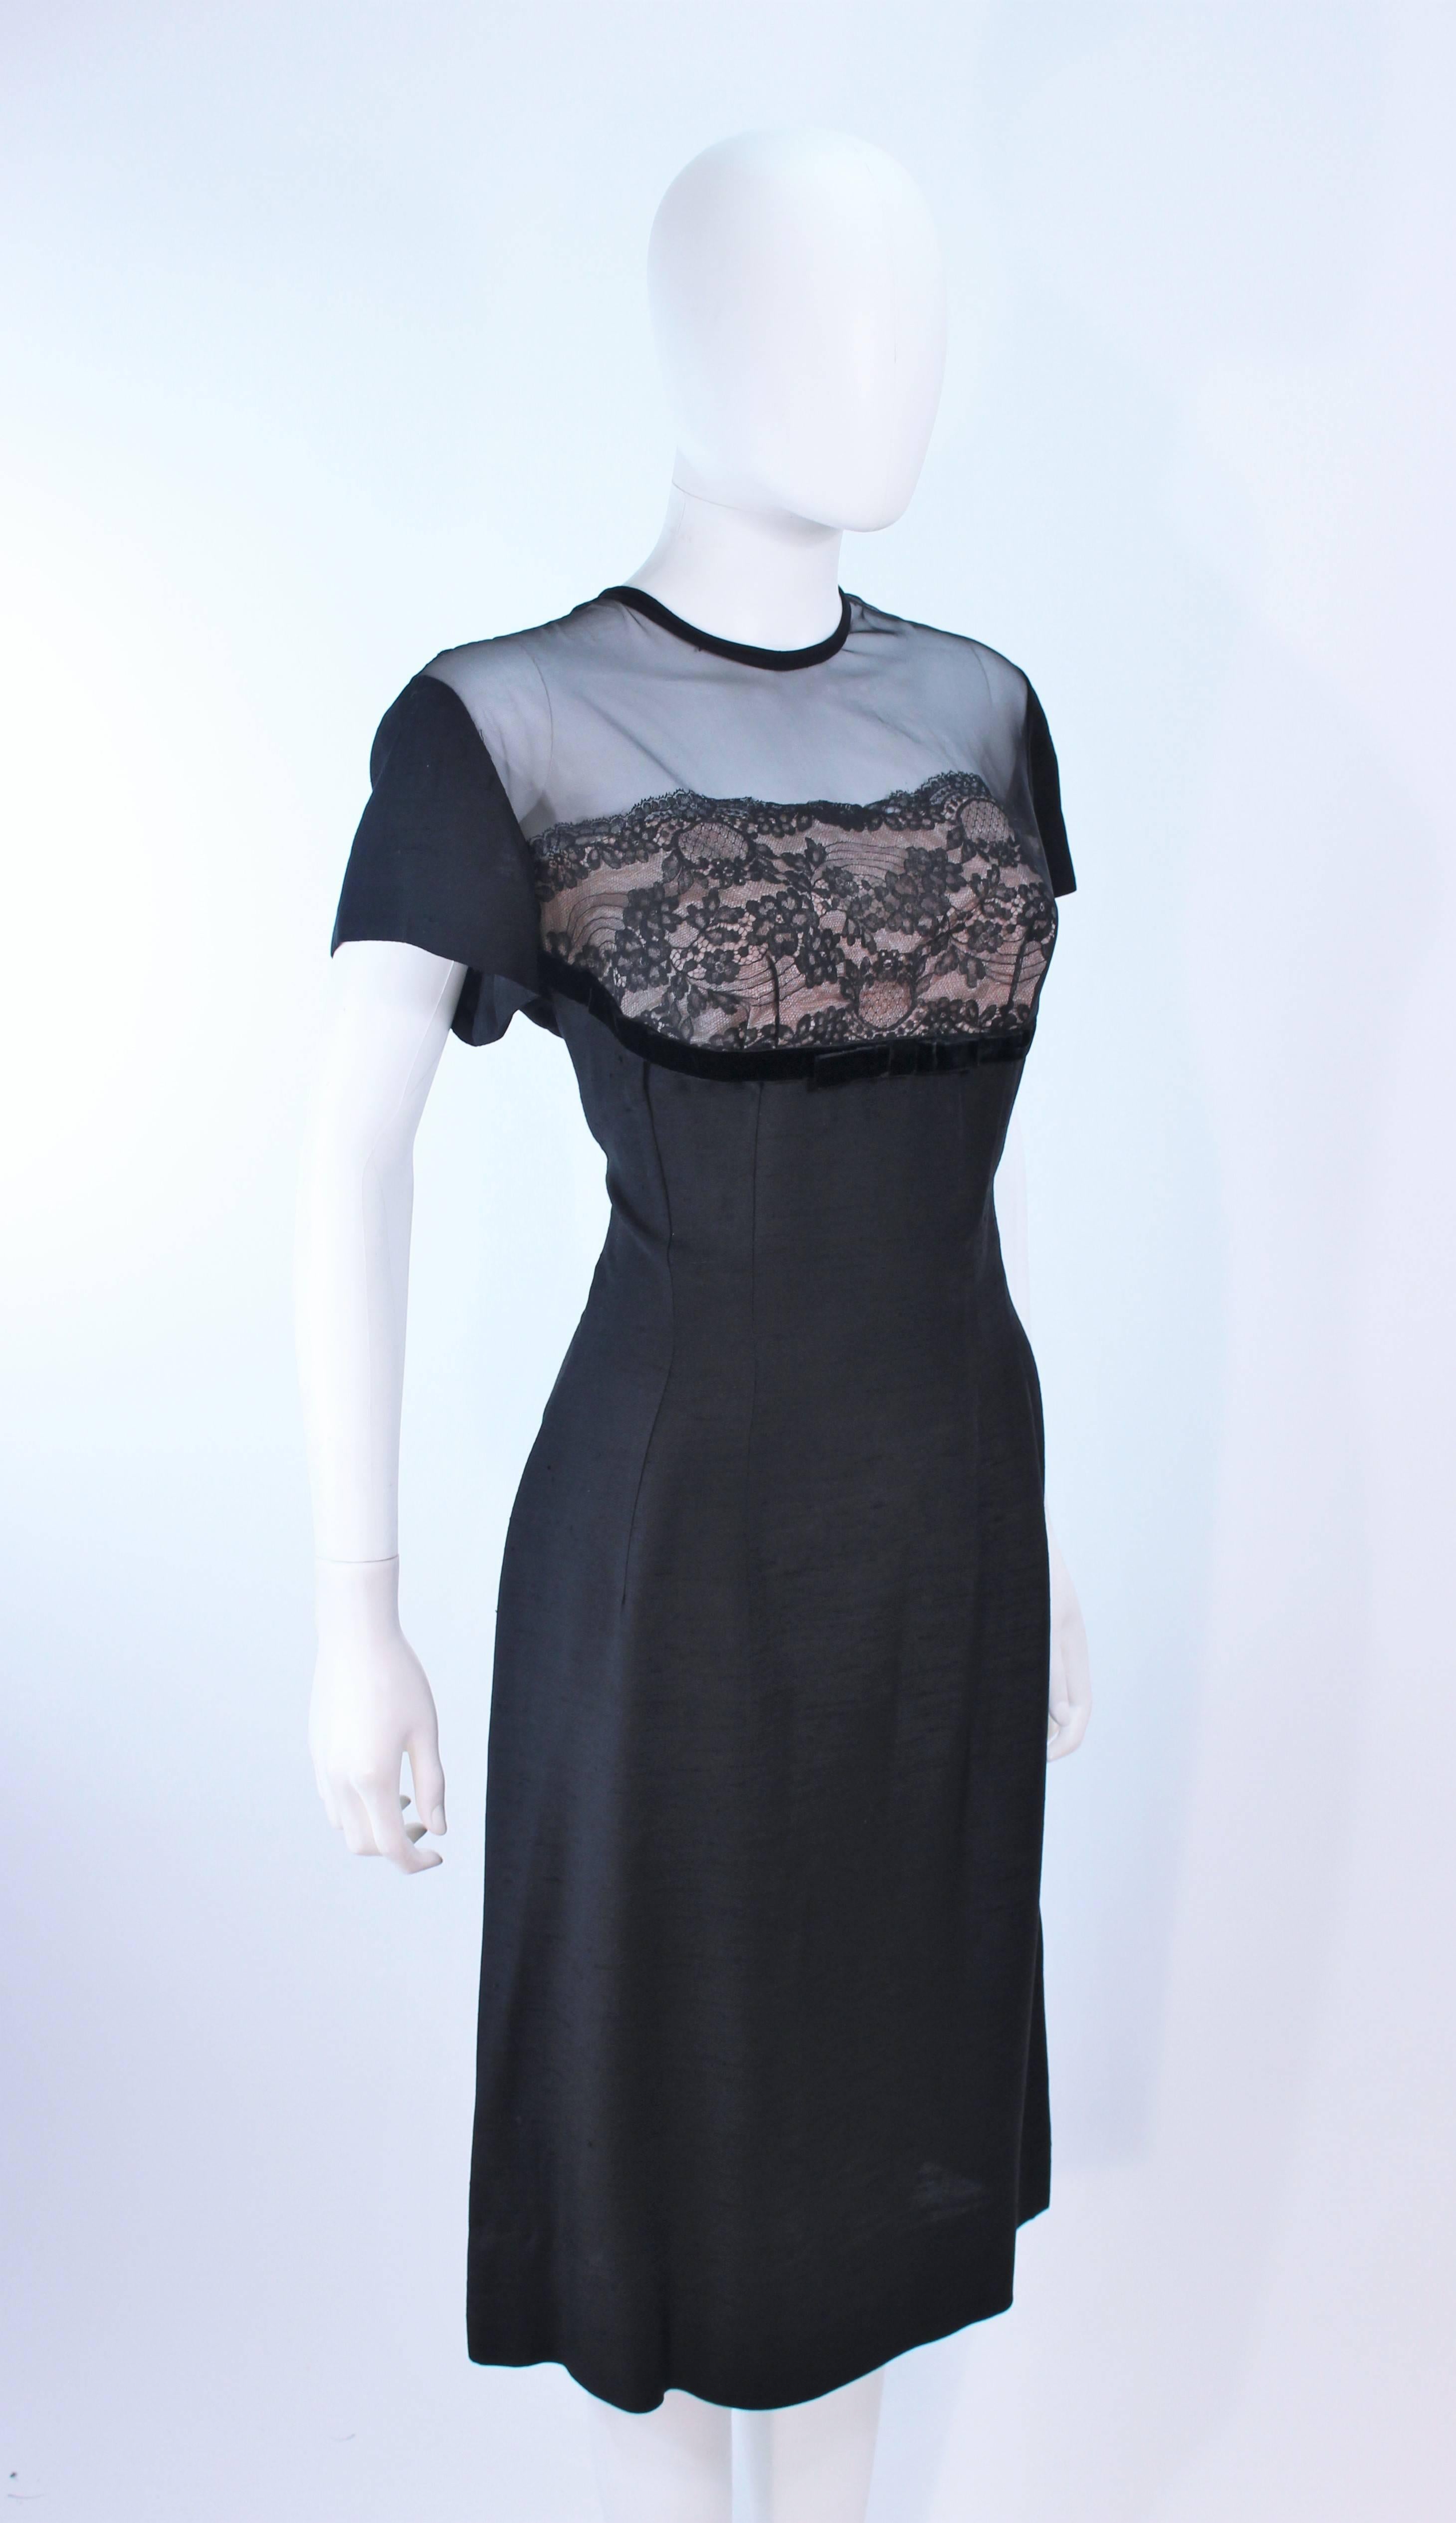 J. HARLAN Black Silk and Lace Cocktail Dress with Sheer Details Size 8 ...